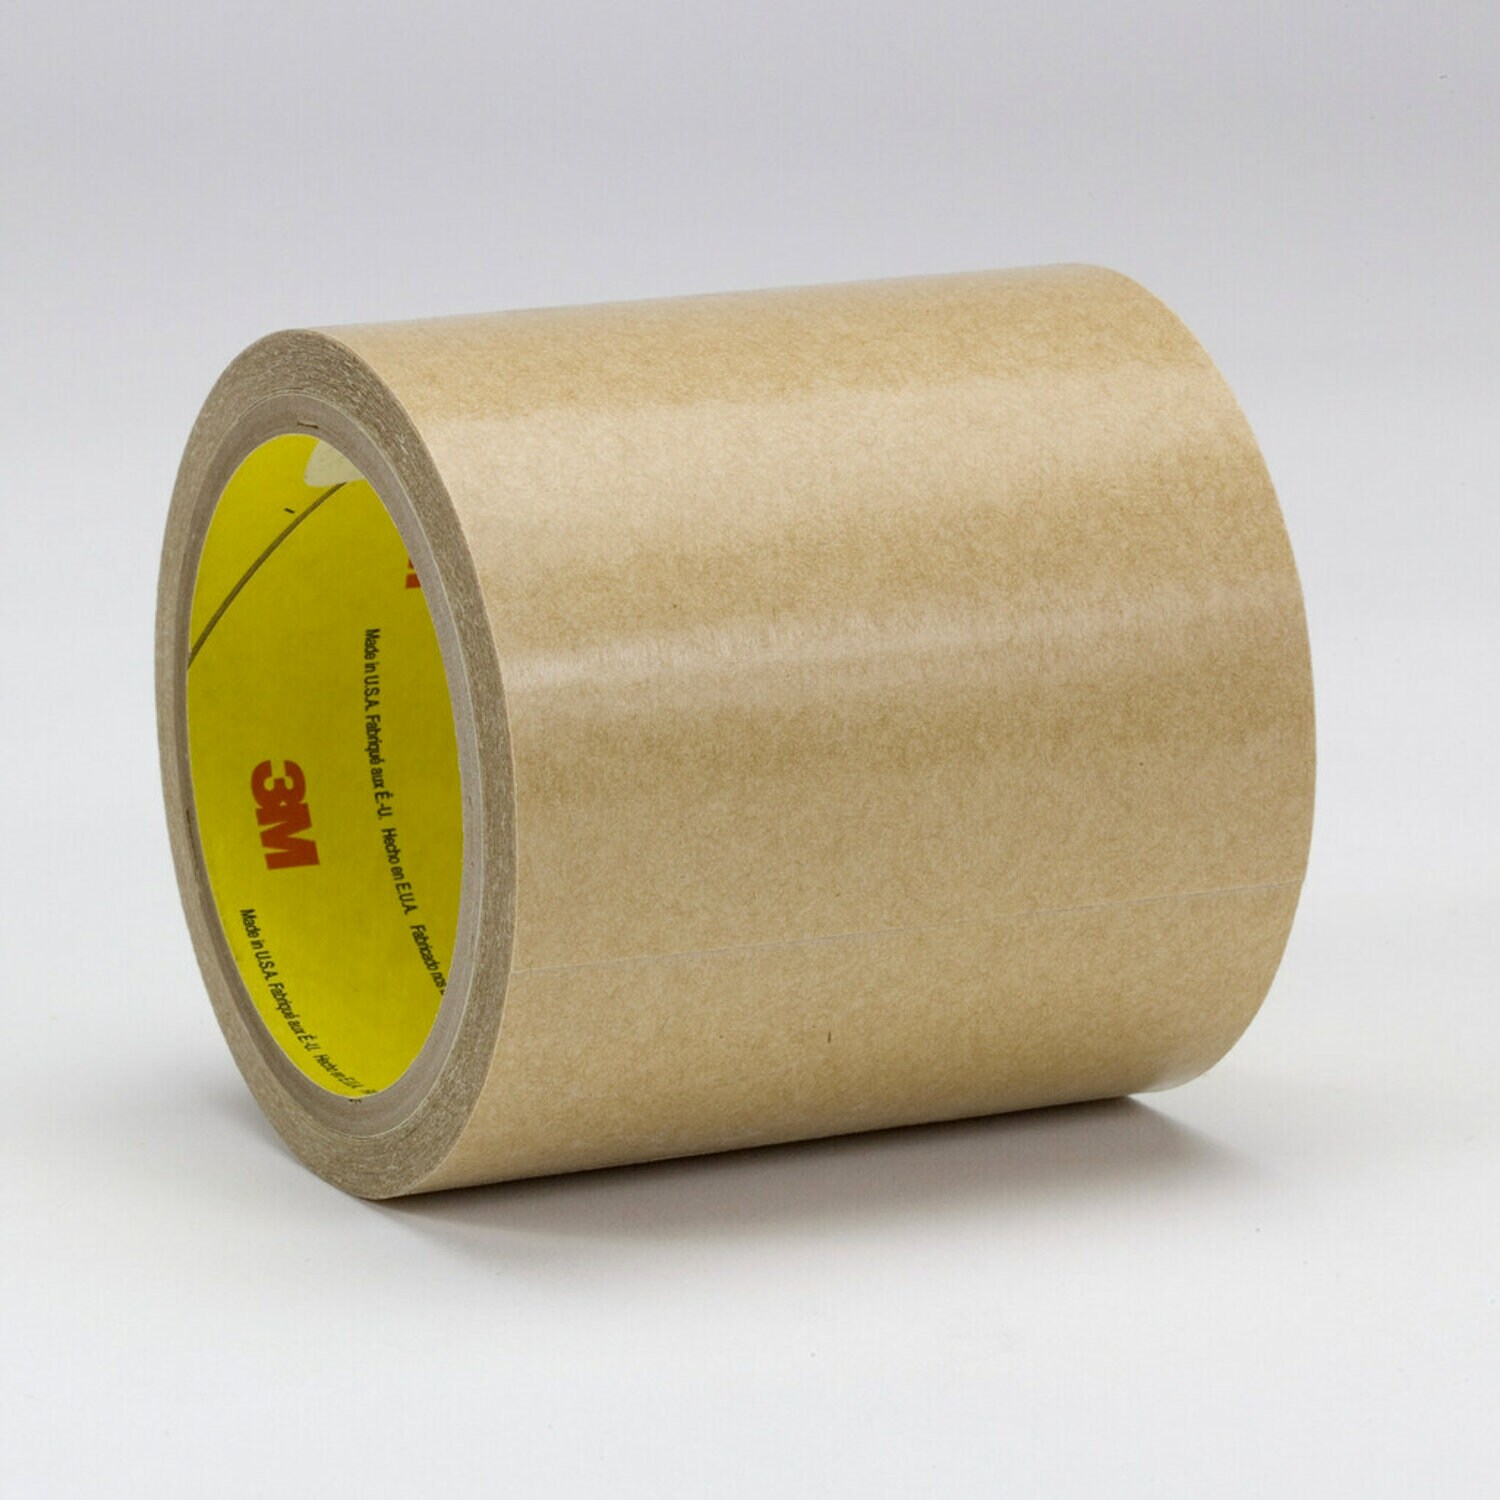 7000048442 - 3M Adhesive Transfer Tape 927, Clear, 1/2 in x 60 yd, 2 mil, 72 rolls
per case